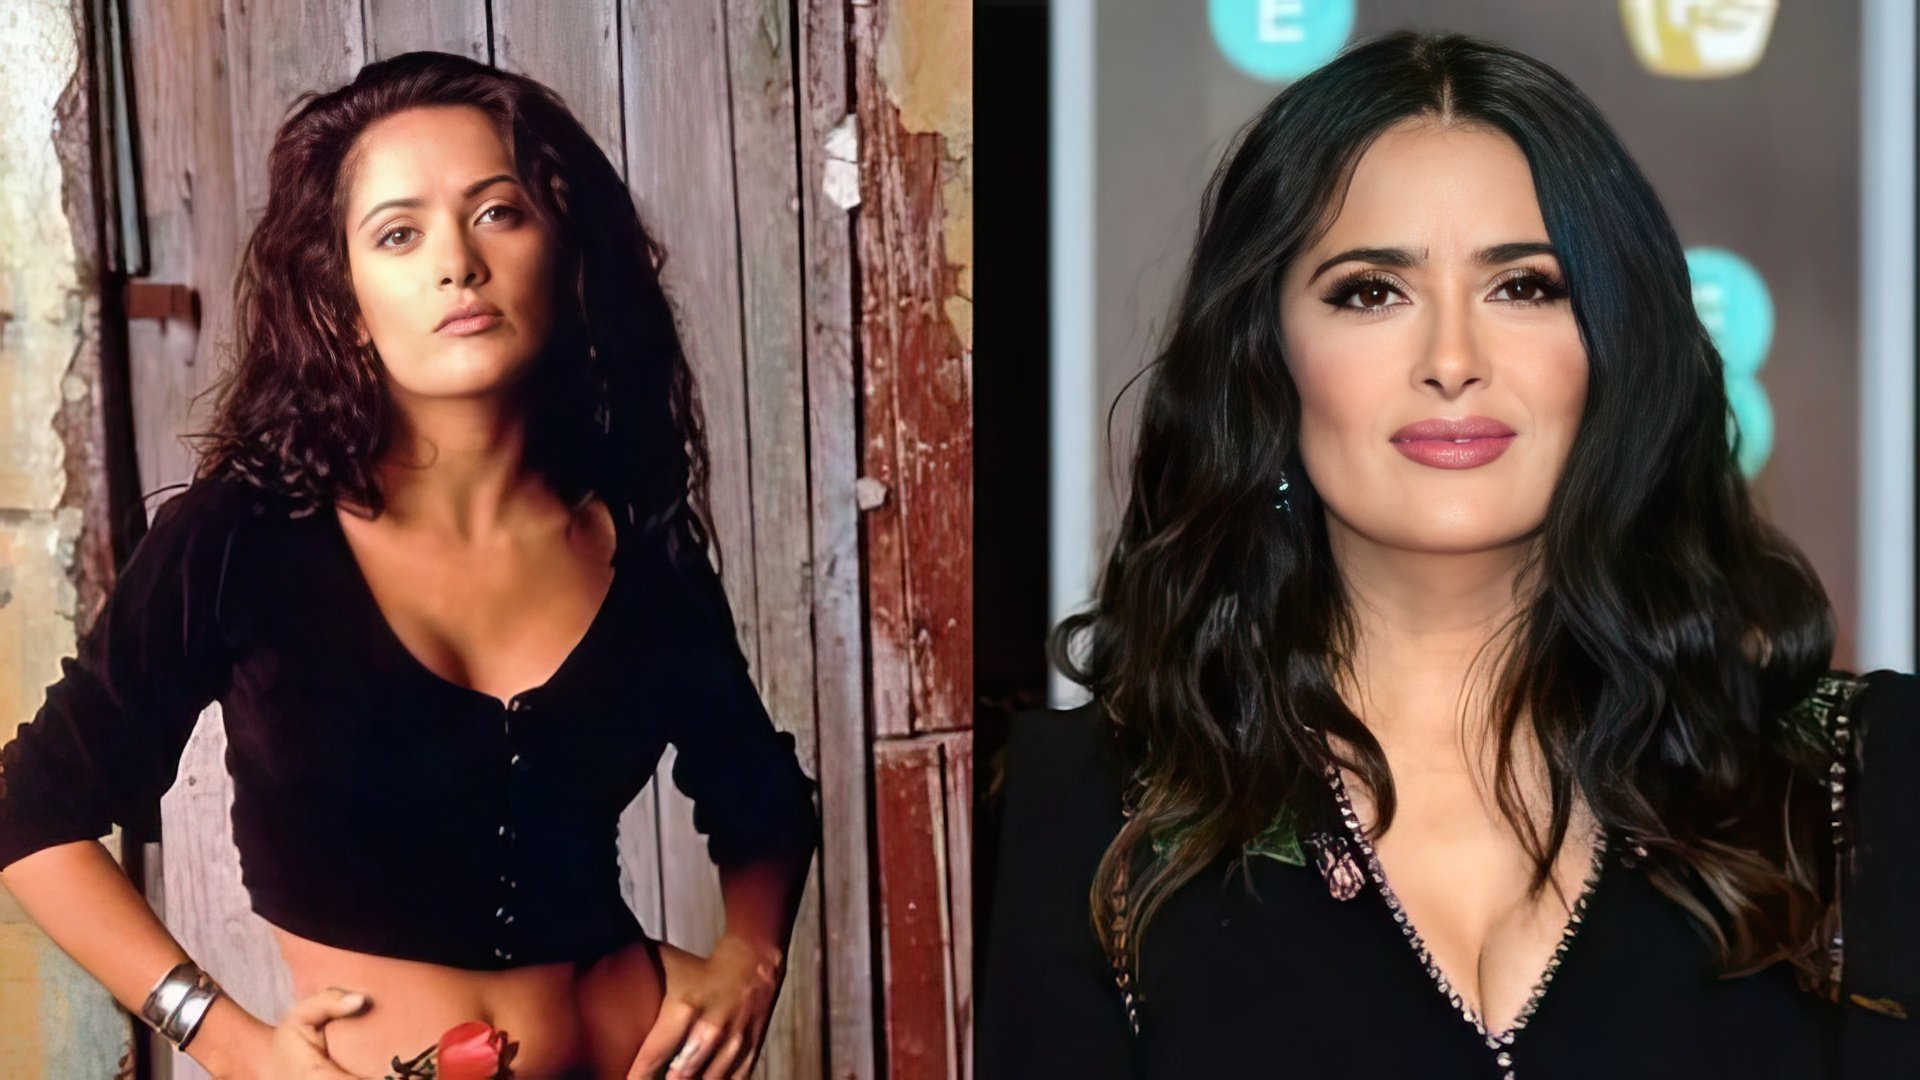 Salma Hayek back in her youth and nowadays